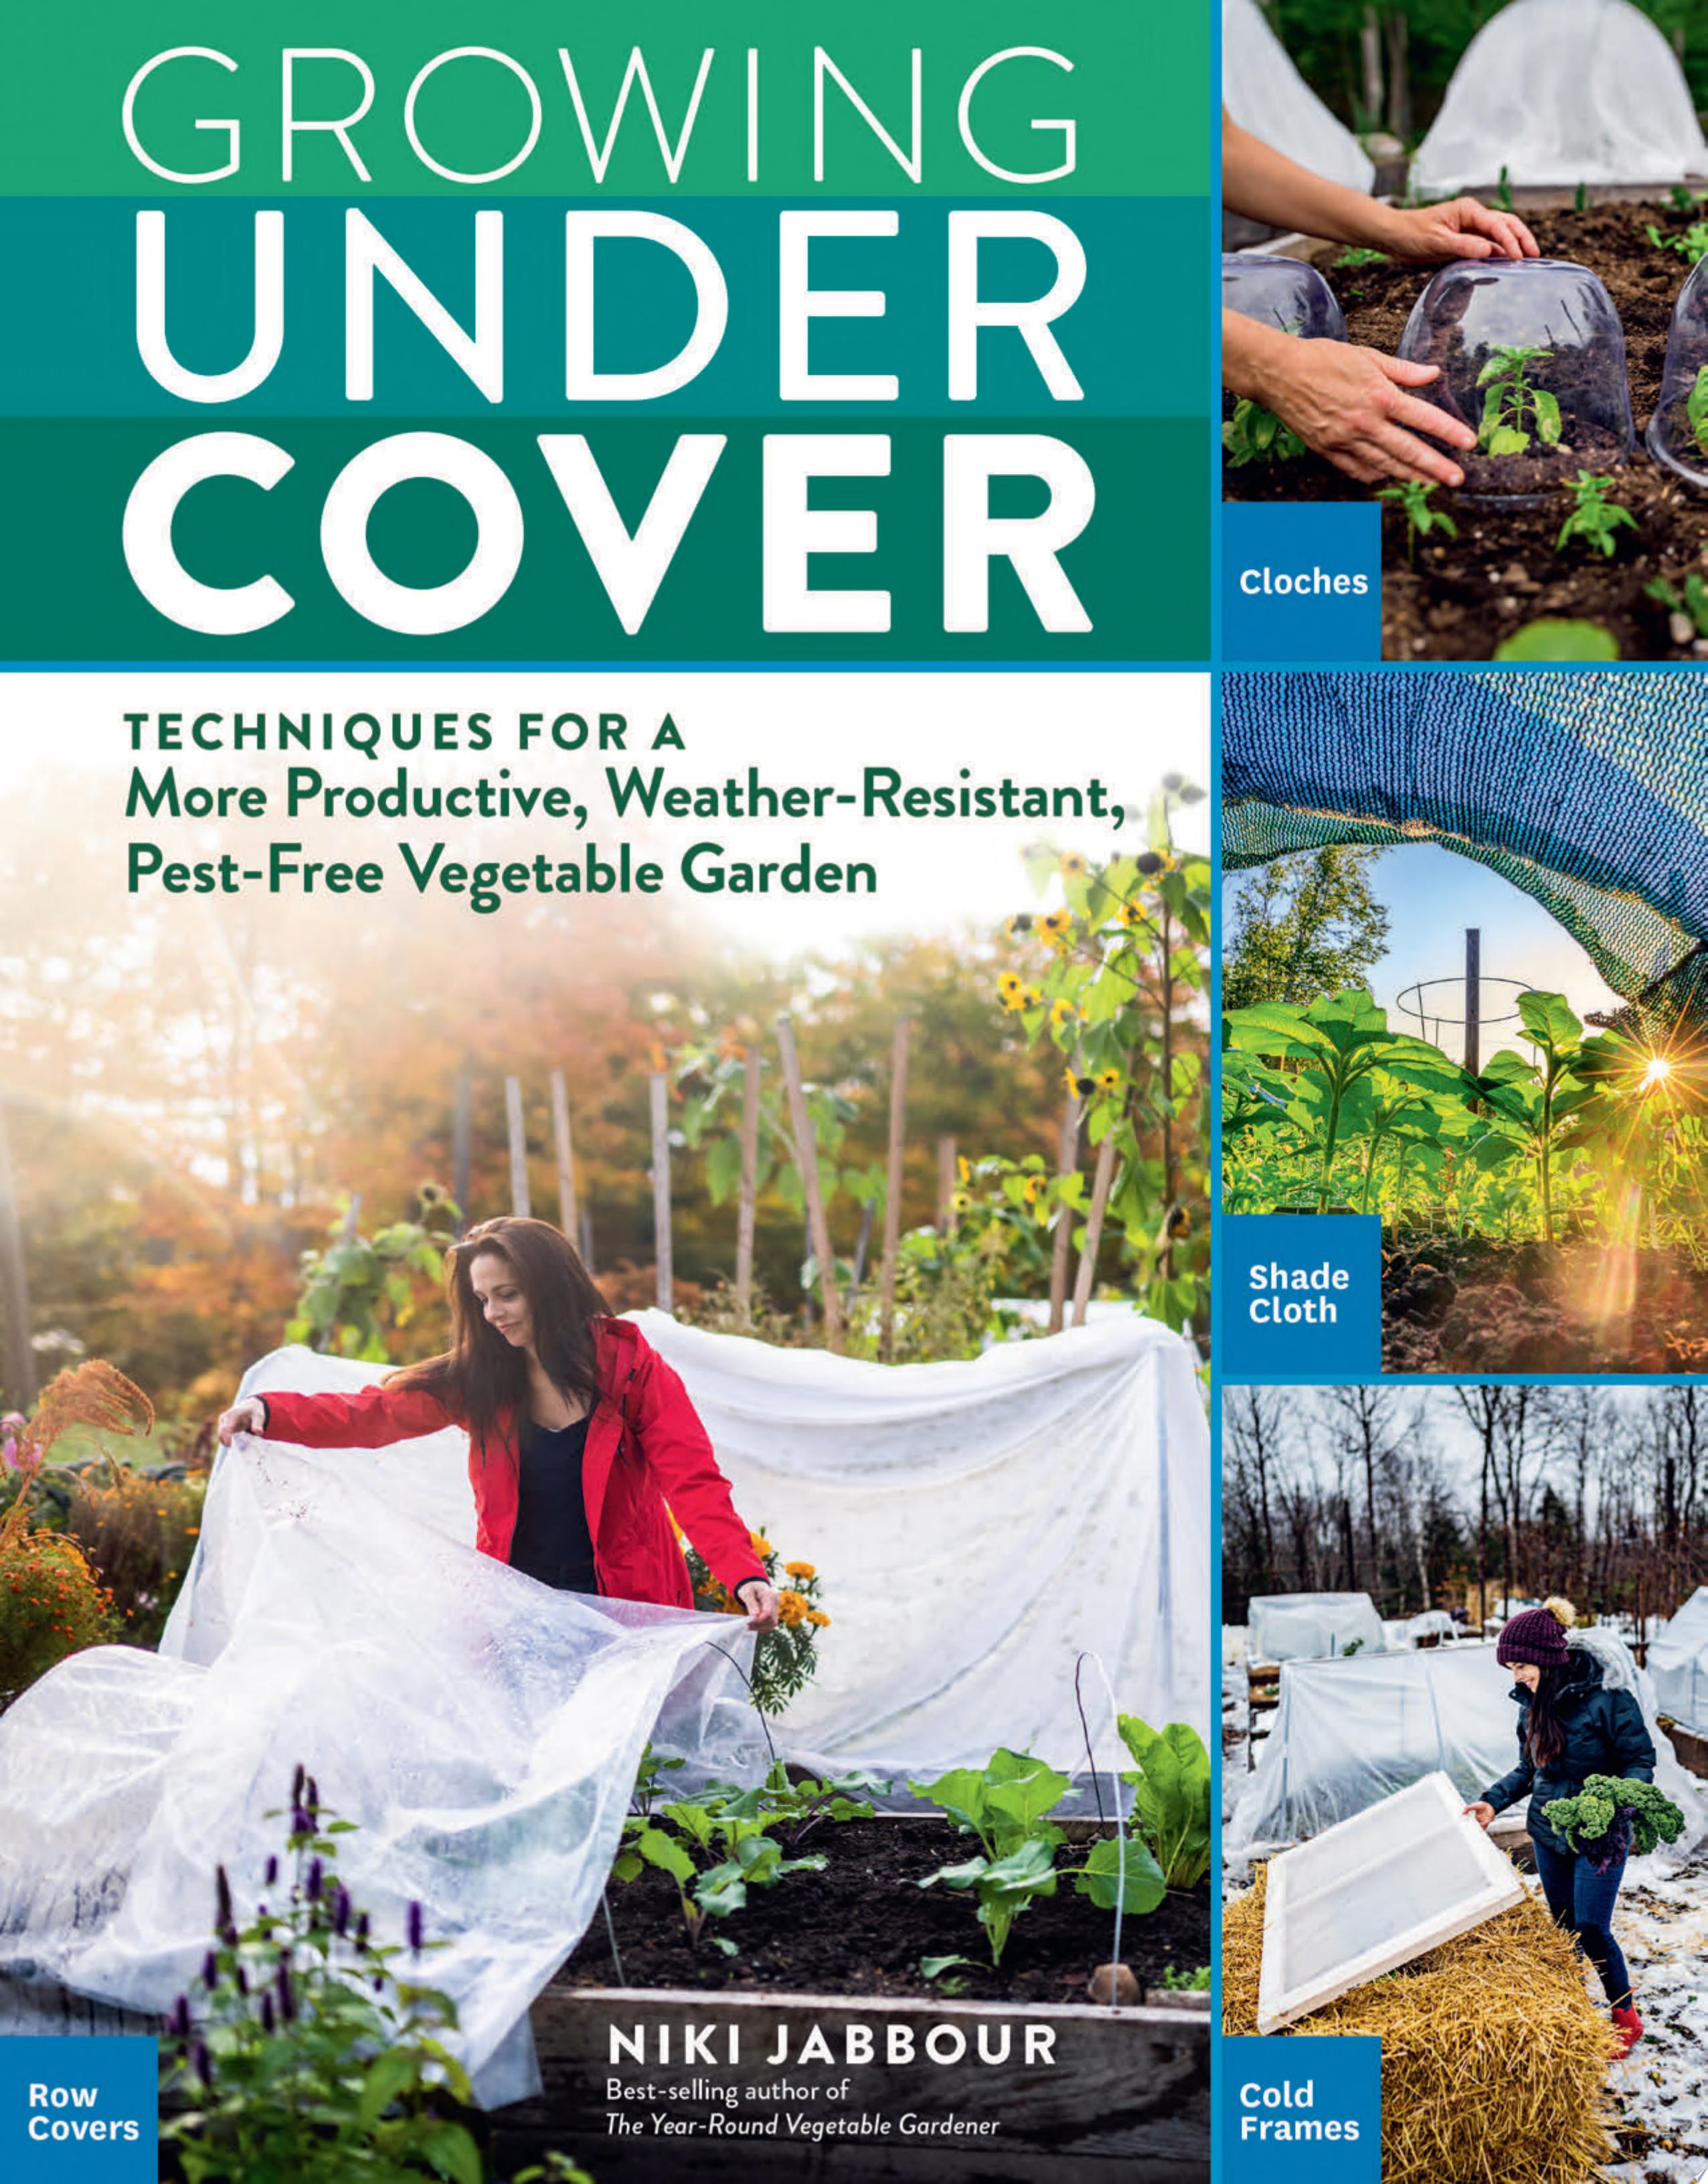 Image for "Growing Under Cover"